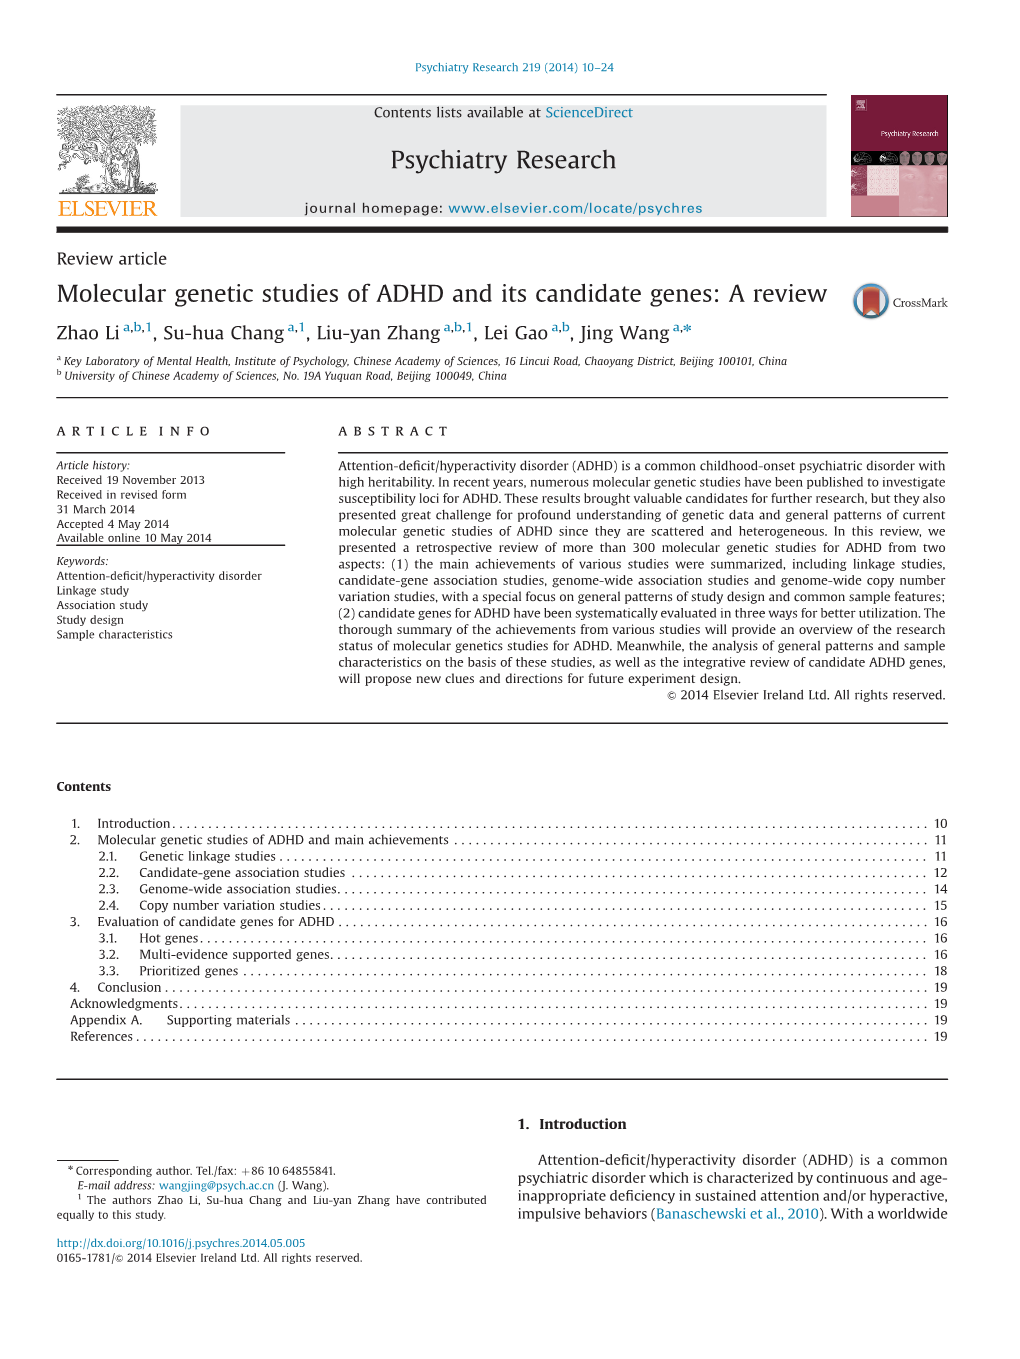 Molecular Genetic Studies of ADHD and Its Candidate Genes a Review